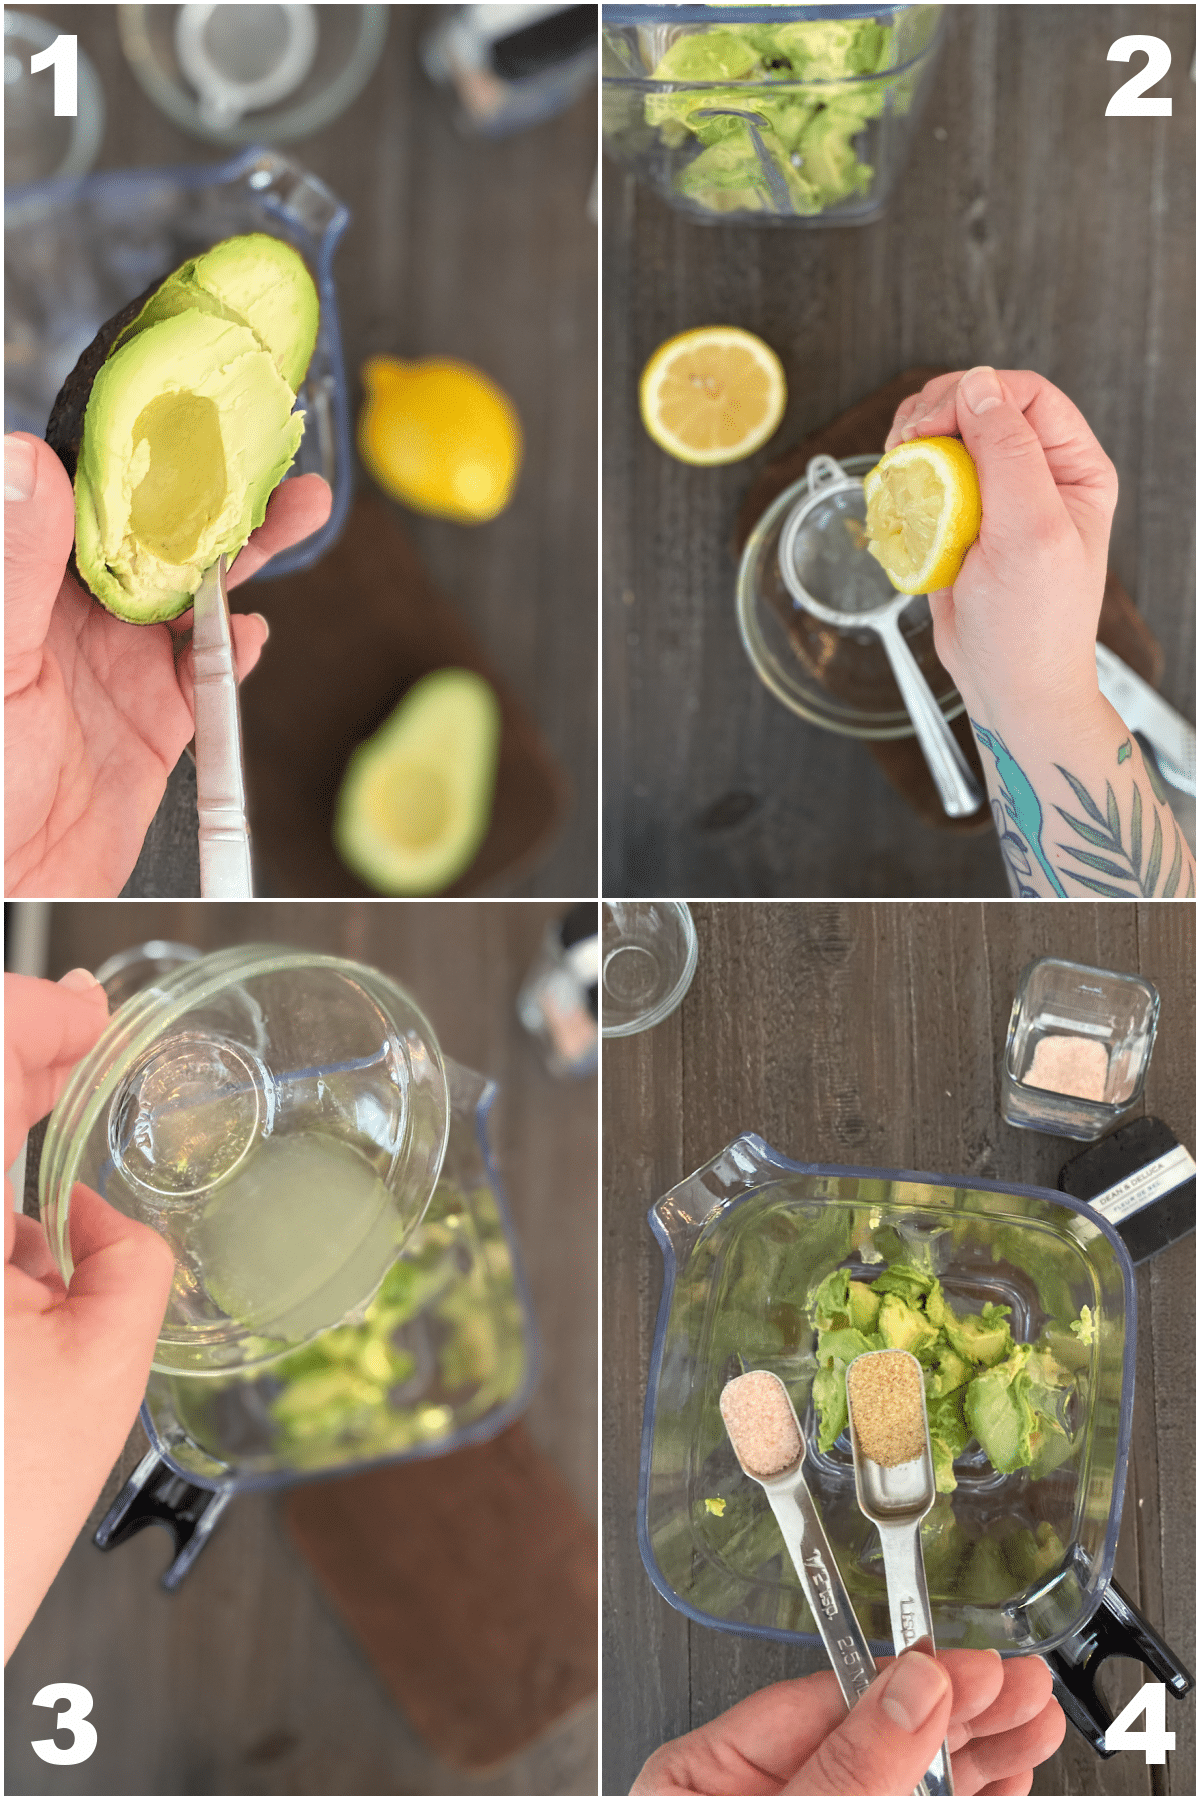 a photo collage showing how to make easy avocado sauce: peel and remove pit from avocado, squeeze lemon juice, add to blender with spices